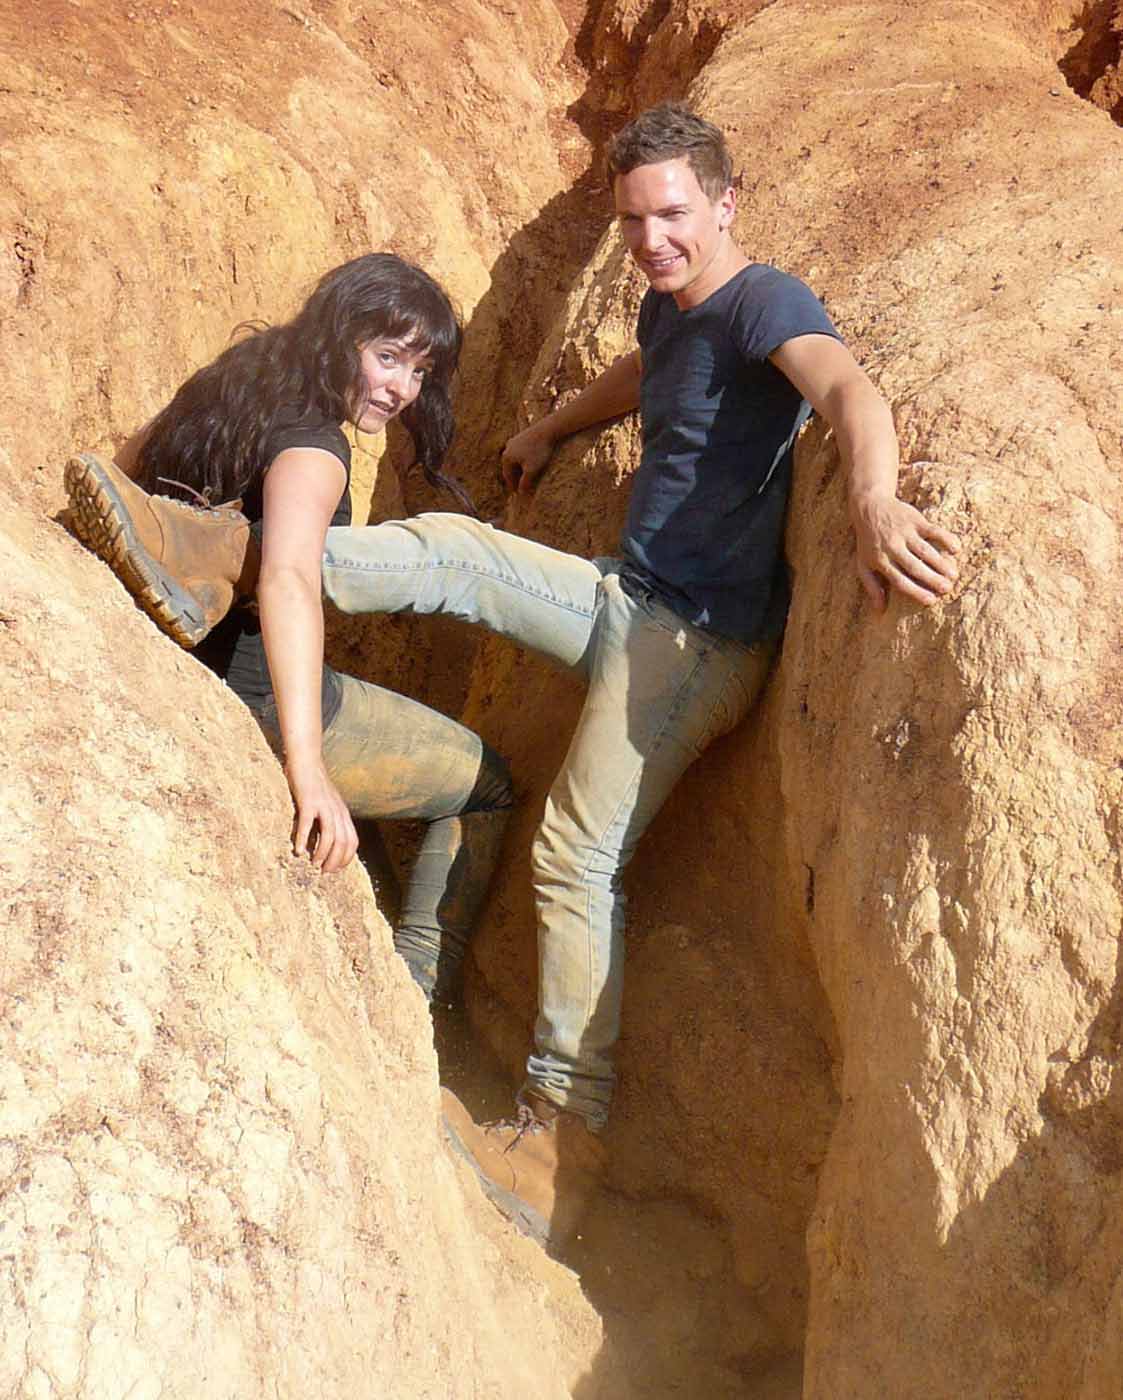 A woman and man support themselves in a rock crevice while posing for the camera. - click to view larger image